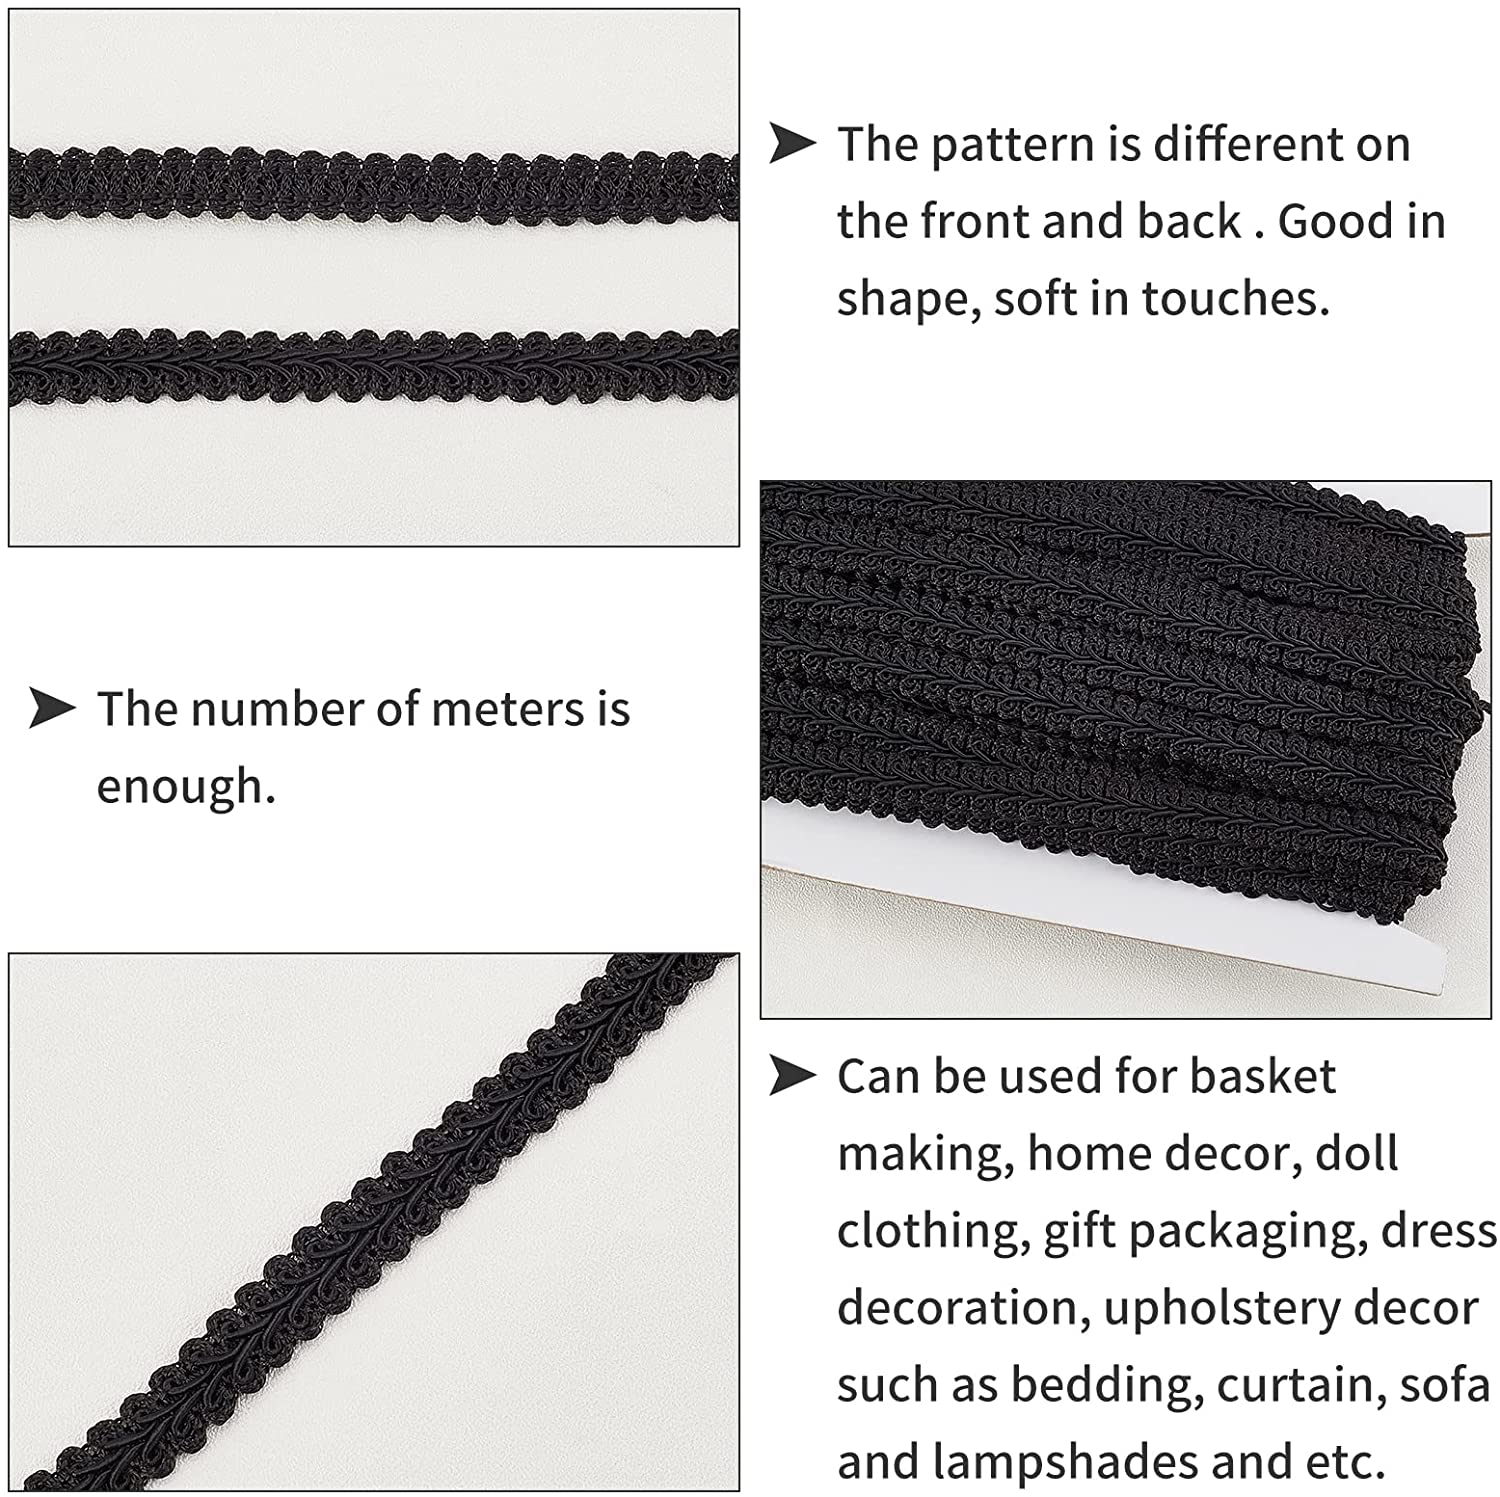 21 Yards Gimp Braid Trim 11mm/0.43 Polyester Woven Braid Trim Fabric Gimp Trim Ribbon for Costume DIY Crafts Sewing Upholstery Home Decoration Accessories, Black